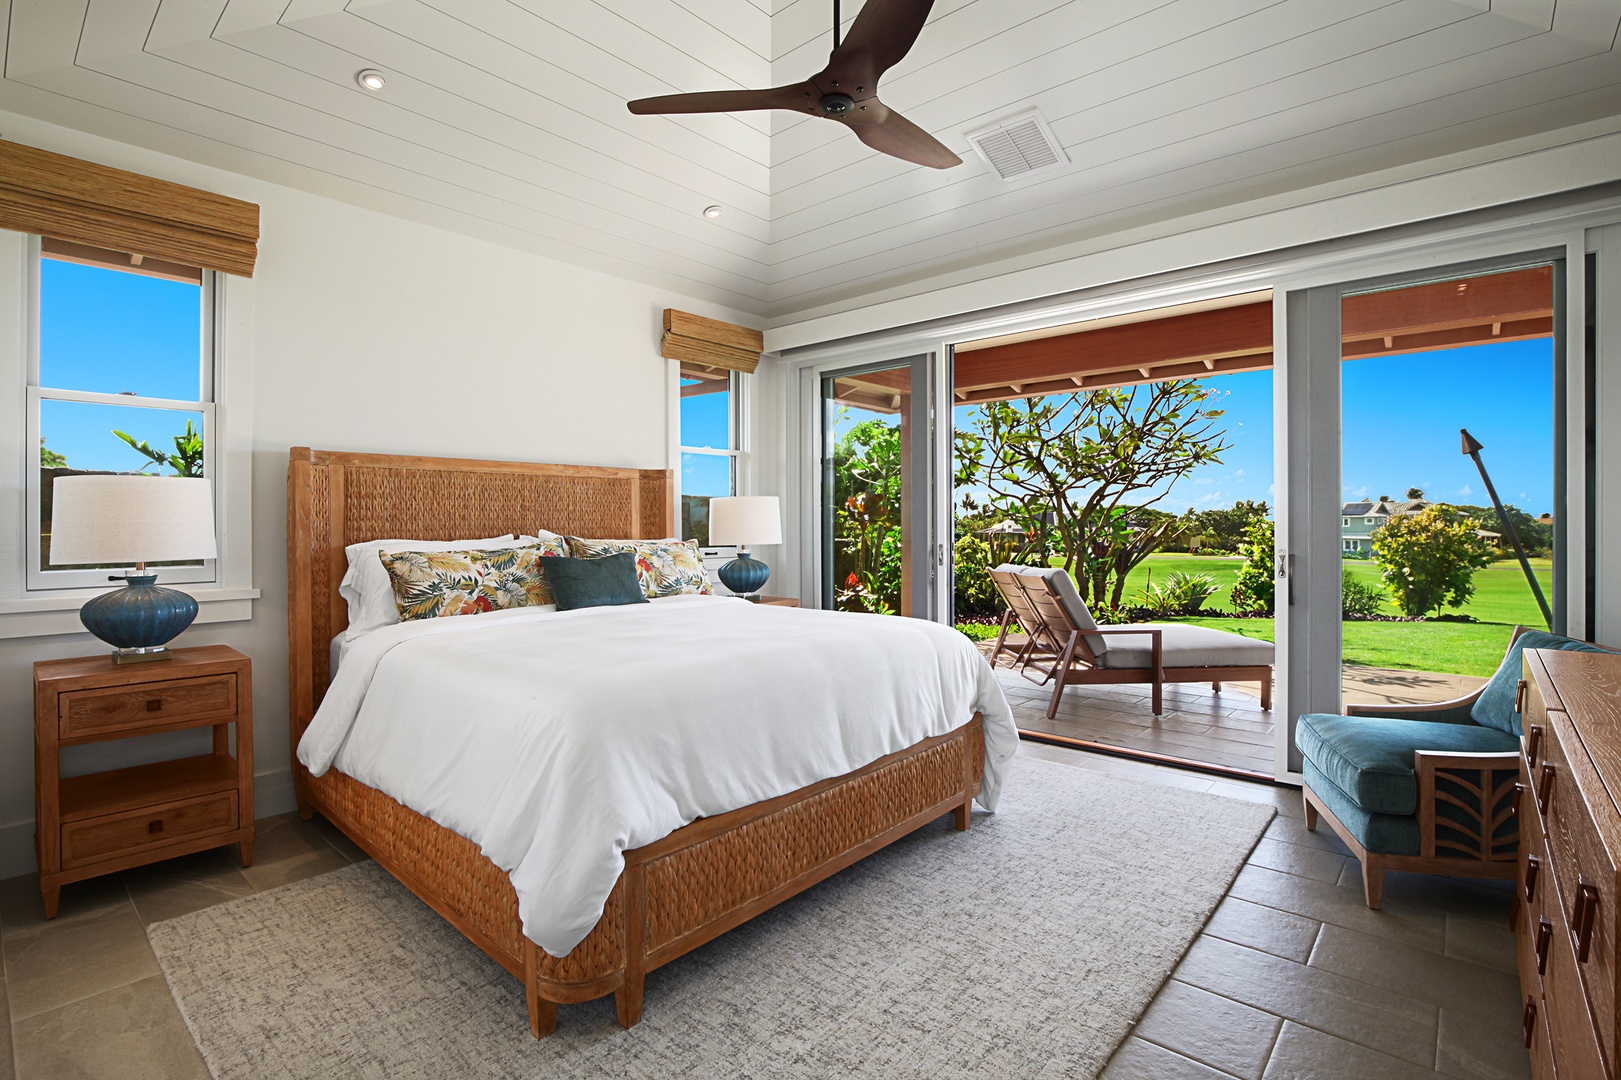 Koloa Vacation Rentals, Hale Mala Ulu - Primary bedroom with king bed Ensuite Bathroom, Golf Course View, Ocean View